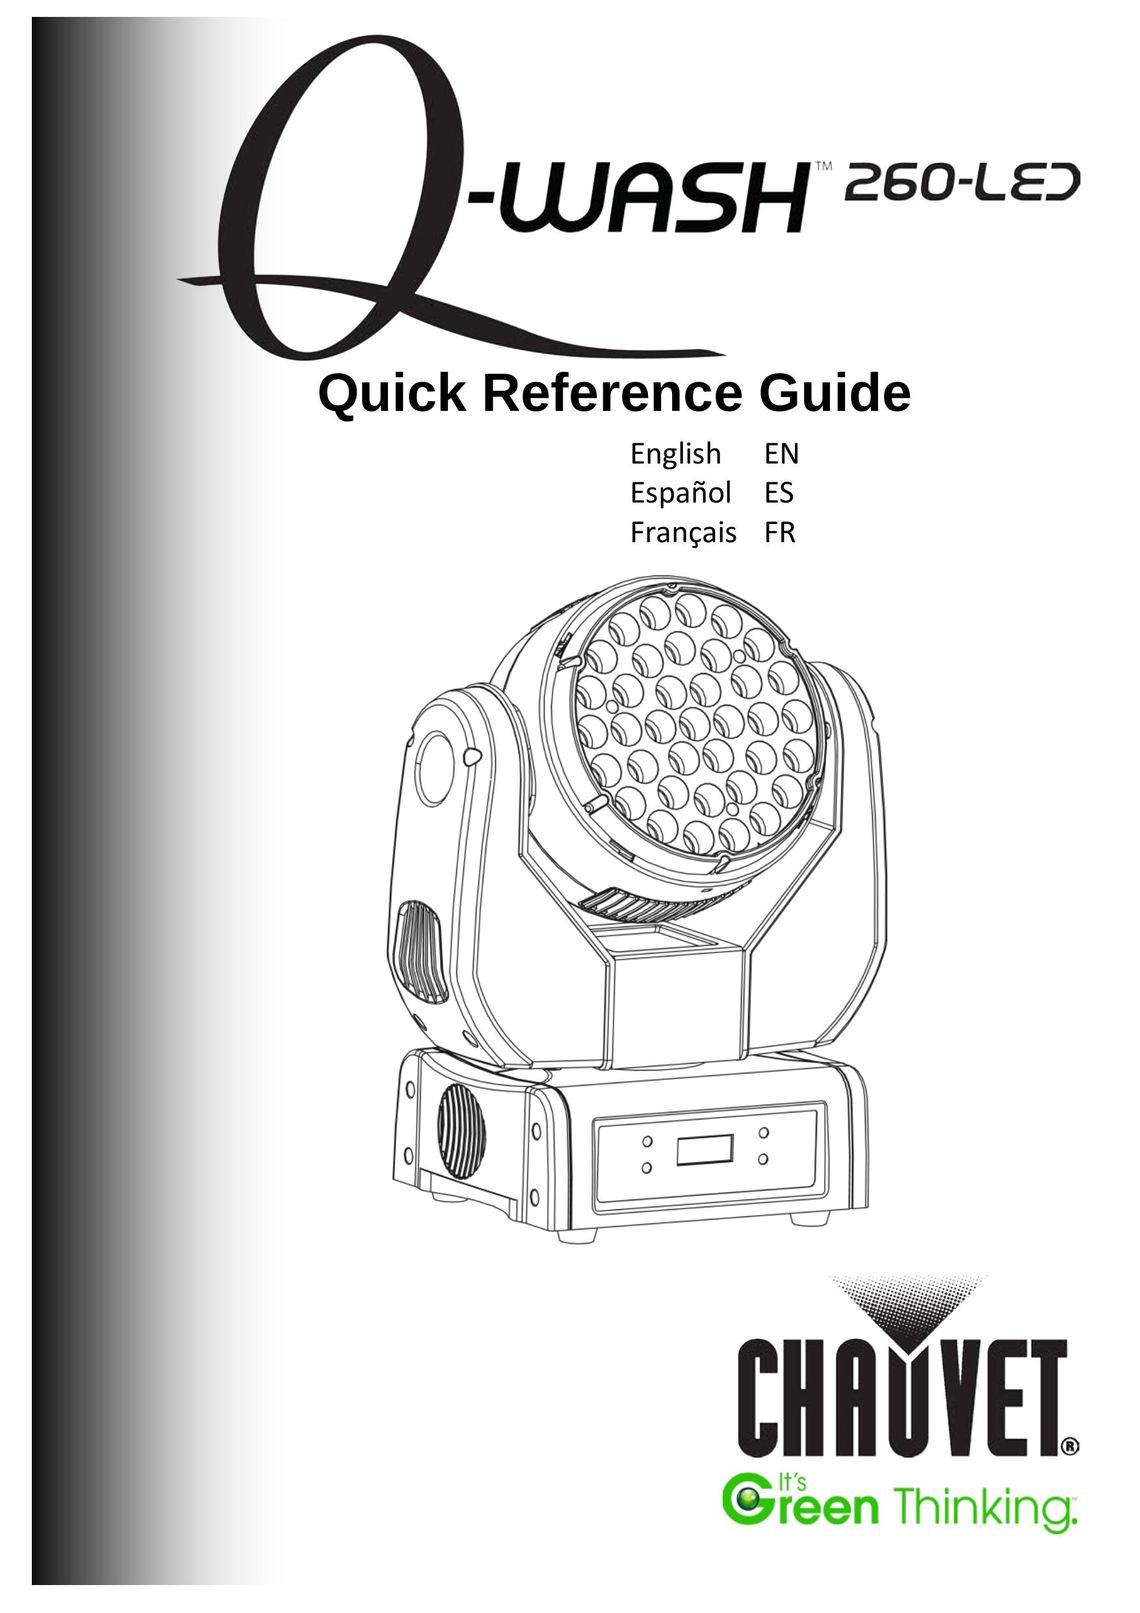 Chauvet 260-LED Tablet Accessory User Manual